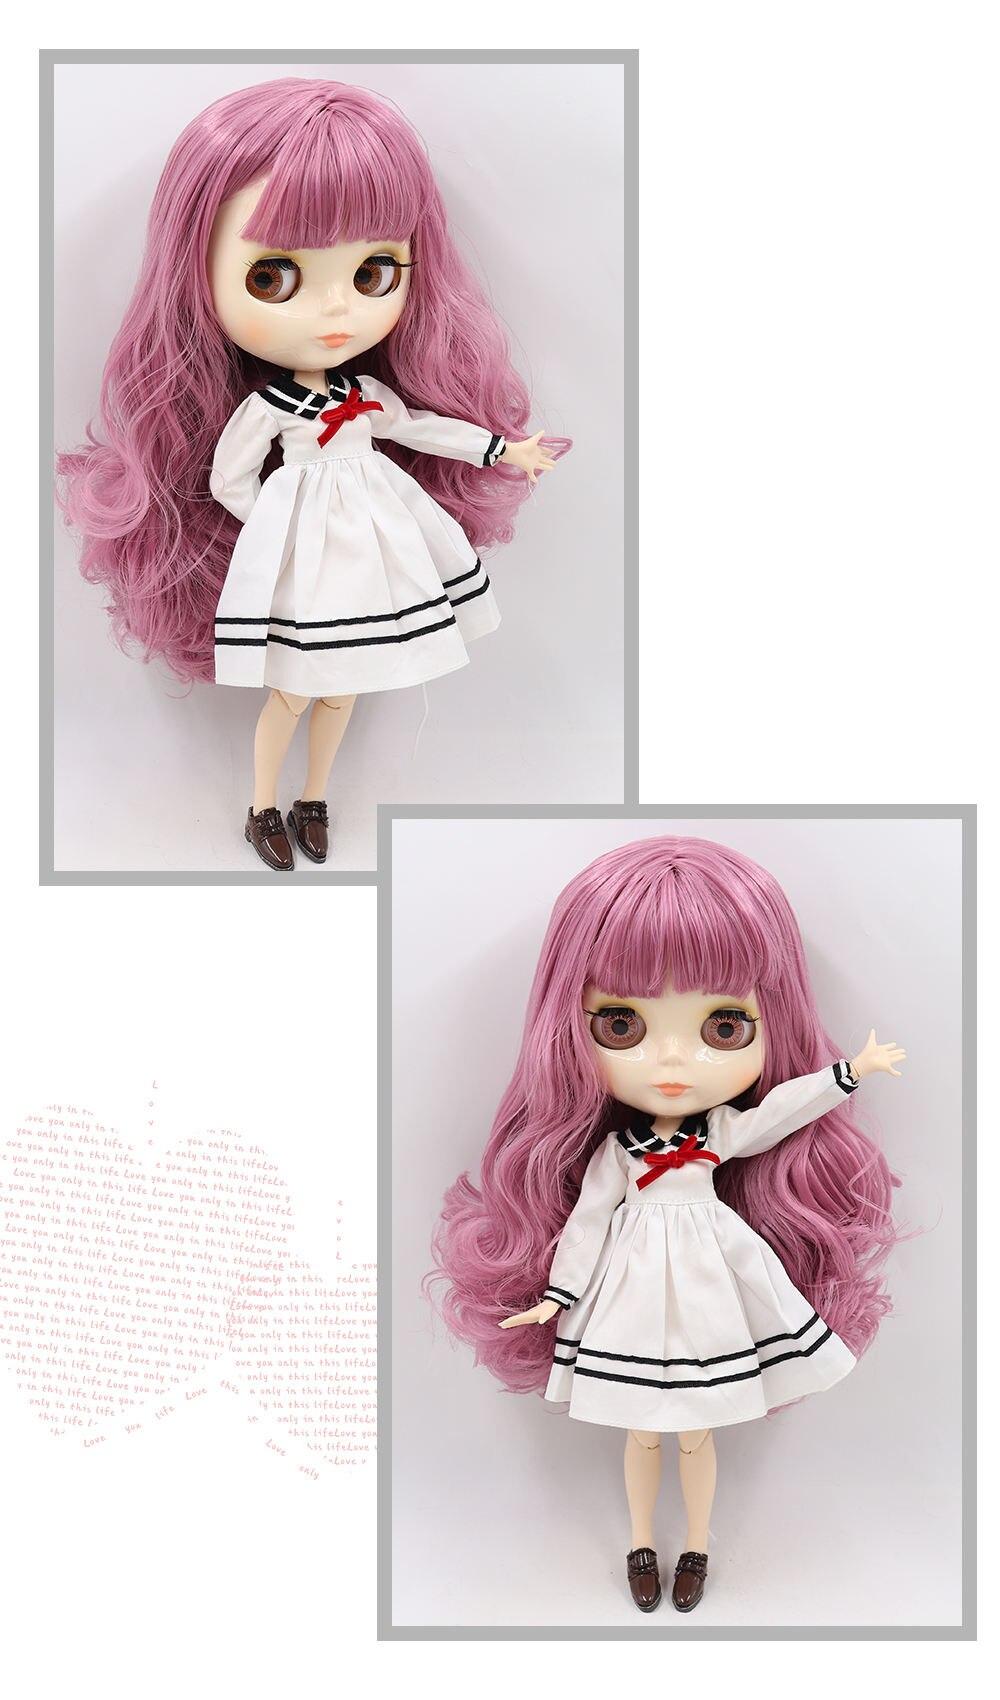 Neo Blythe Doll with Pink Hair, White Skin, Shiny Cute Face & Factory Jointed Body 1